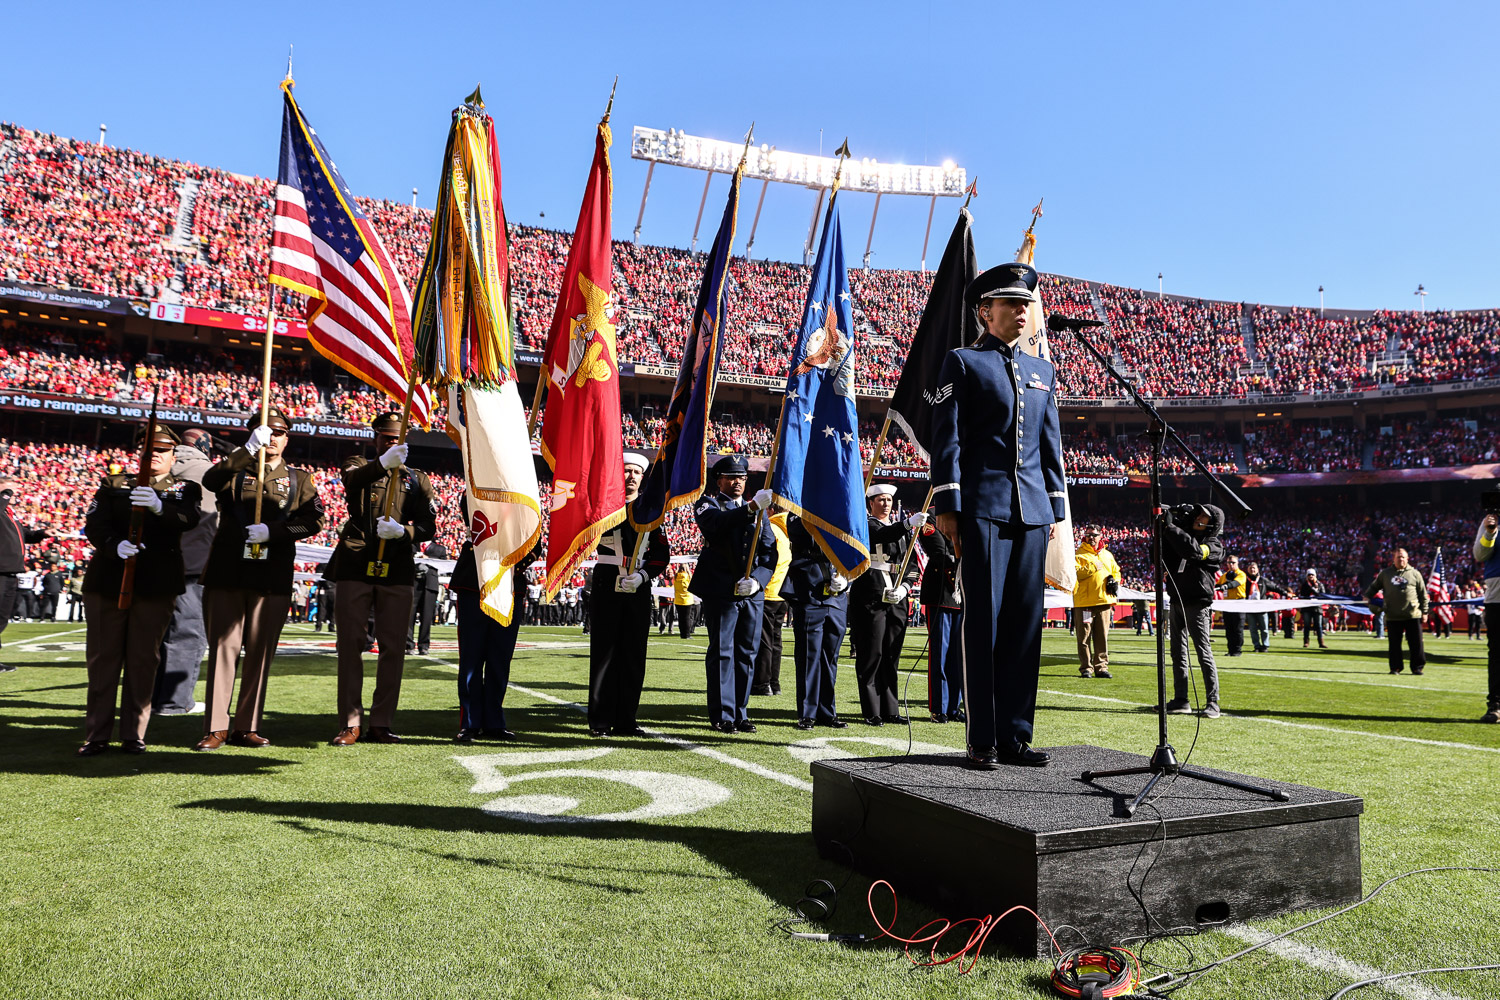 United States Air Force Staff Sergeant Melissa Griffith sings the national anthem prior to an NFL football game against the Jacksonville Jaguars, Sunday, November 13, 2022 in Kansas City.